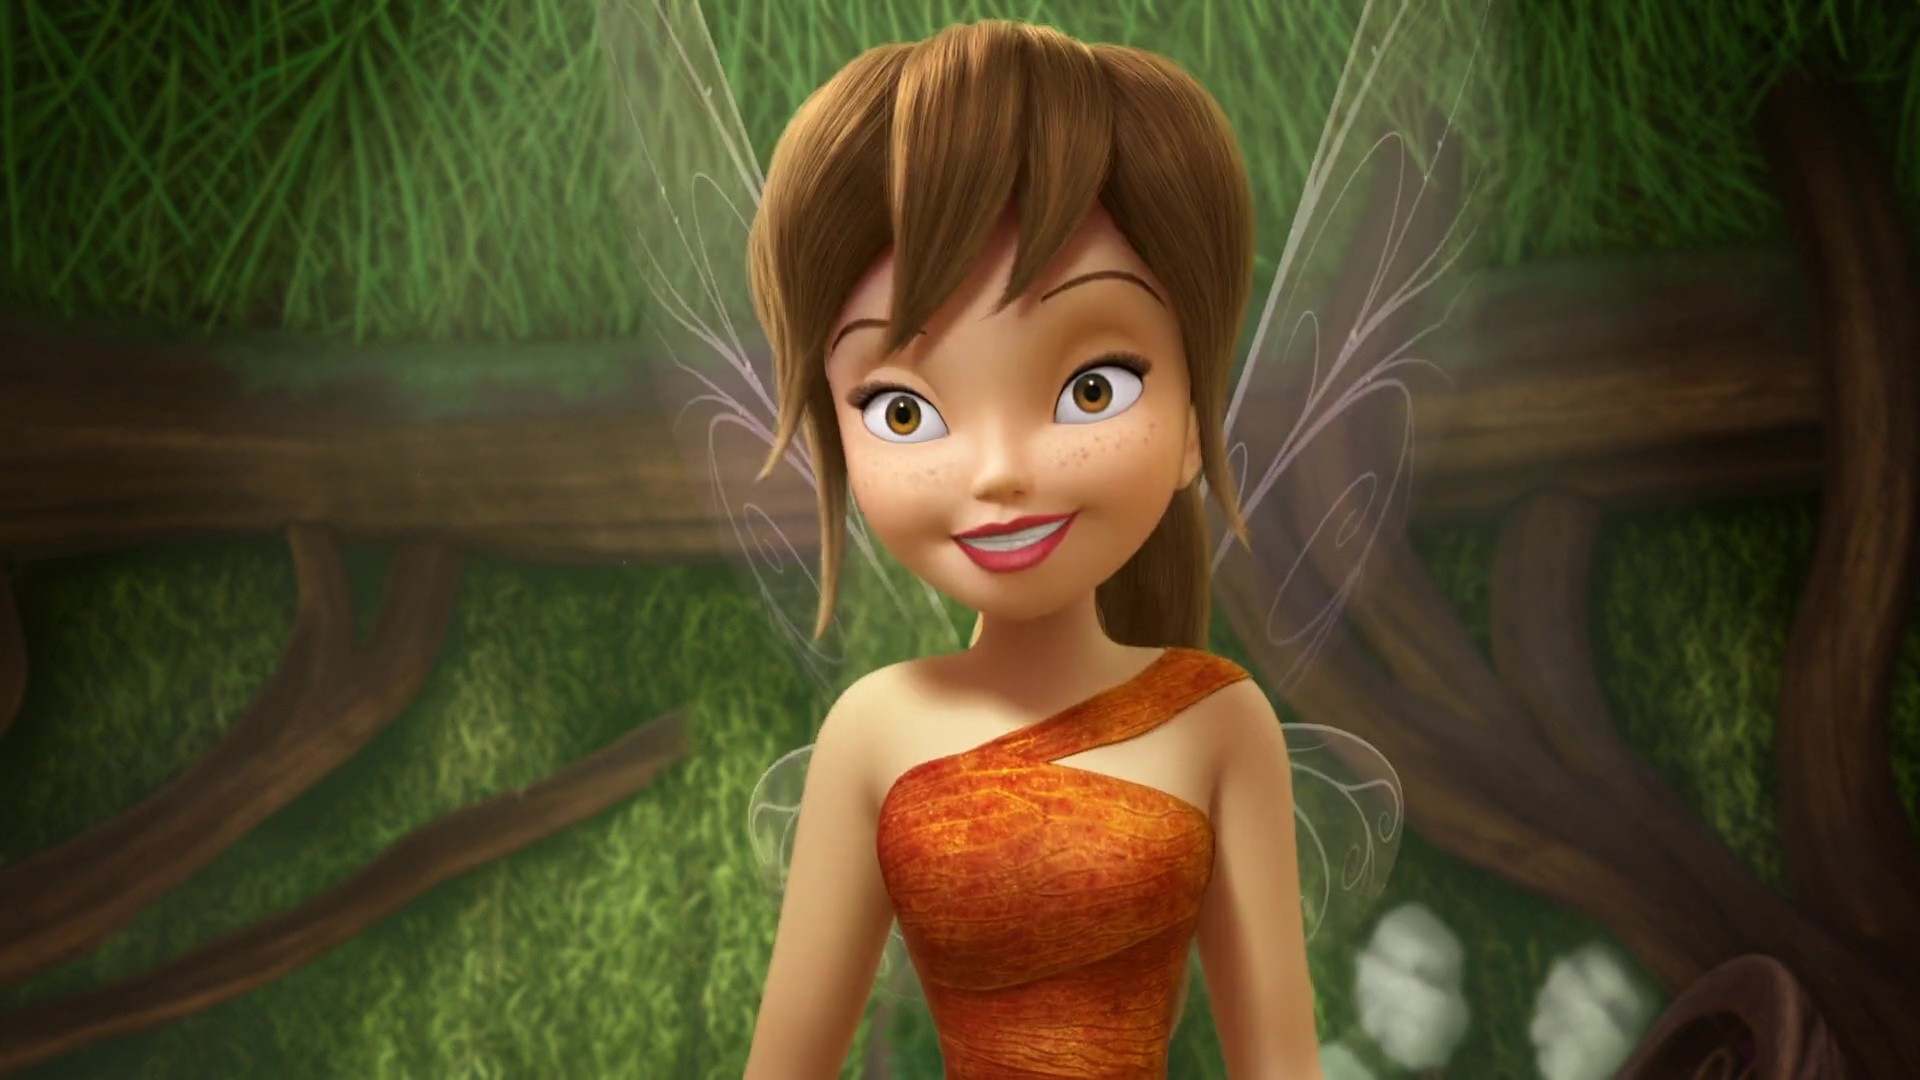 Tinkerbell Cartoon Images Wallpapers